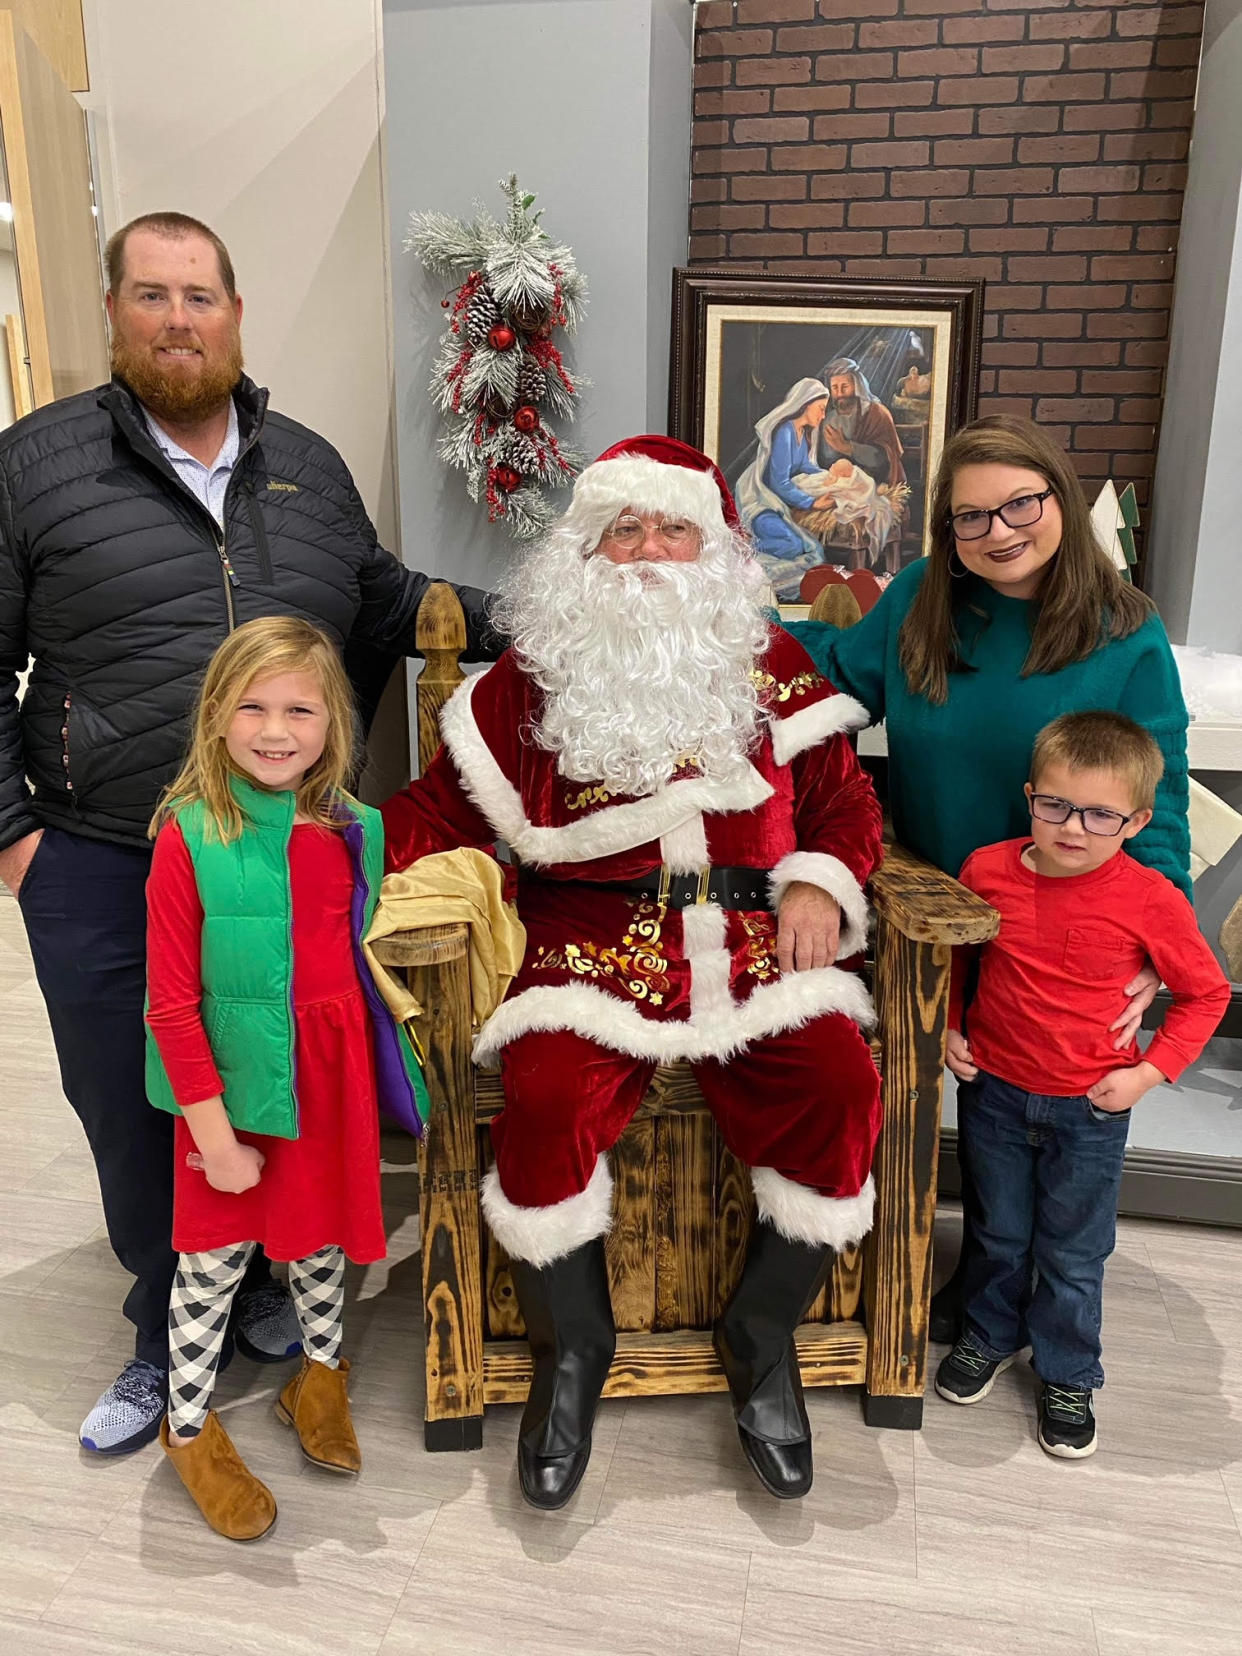 Ally Dorrough's kids are 5 and 7. She hopes to preserve their belief in Santa as long as possible. (Photo: Ally Dorrough)